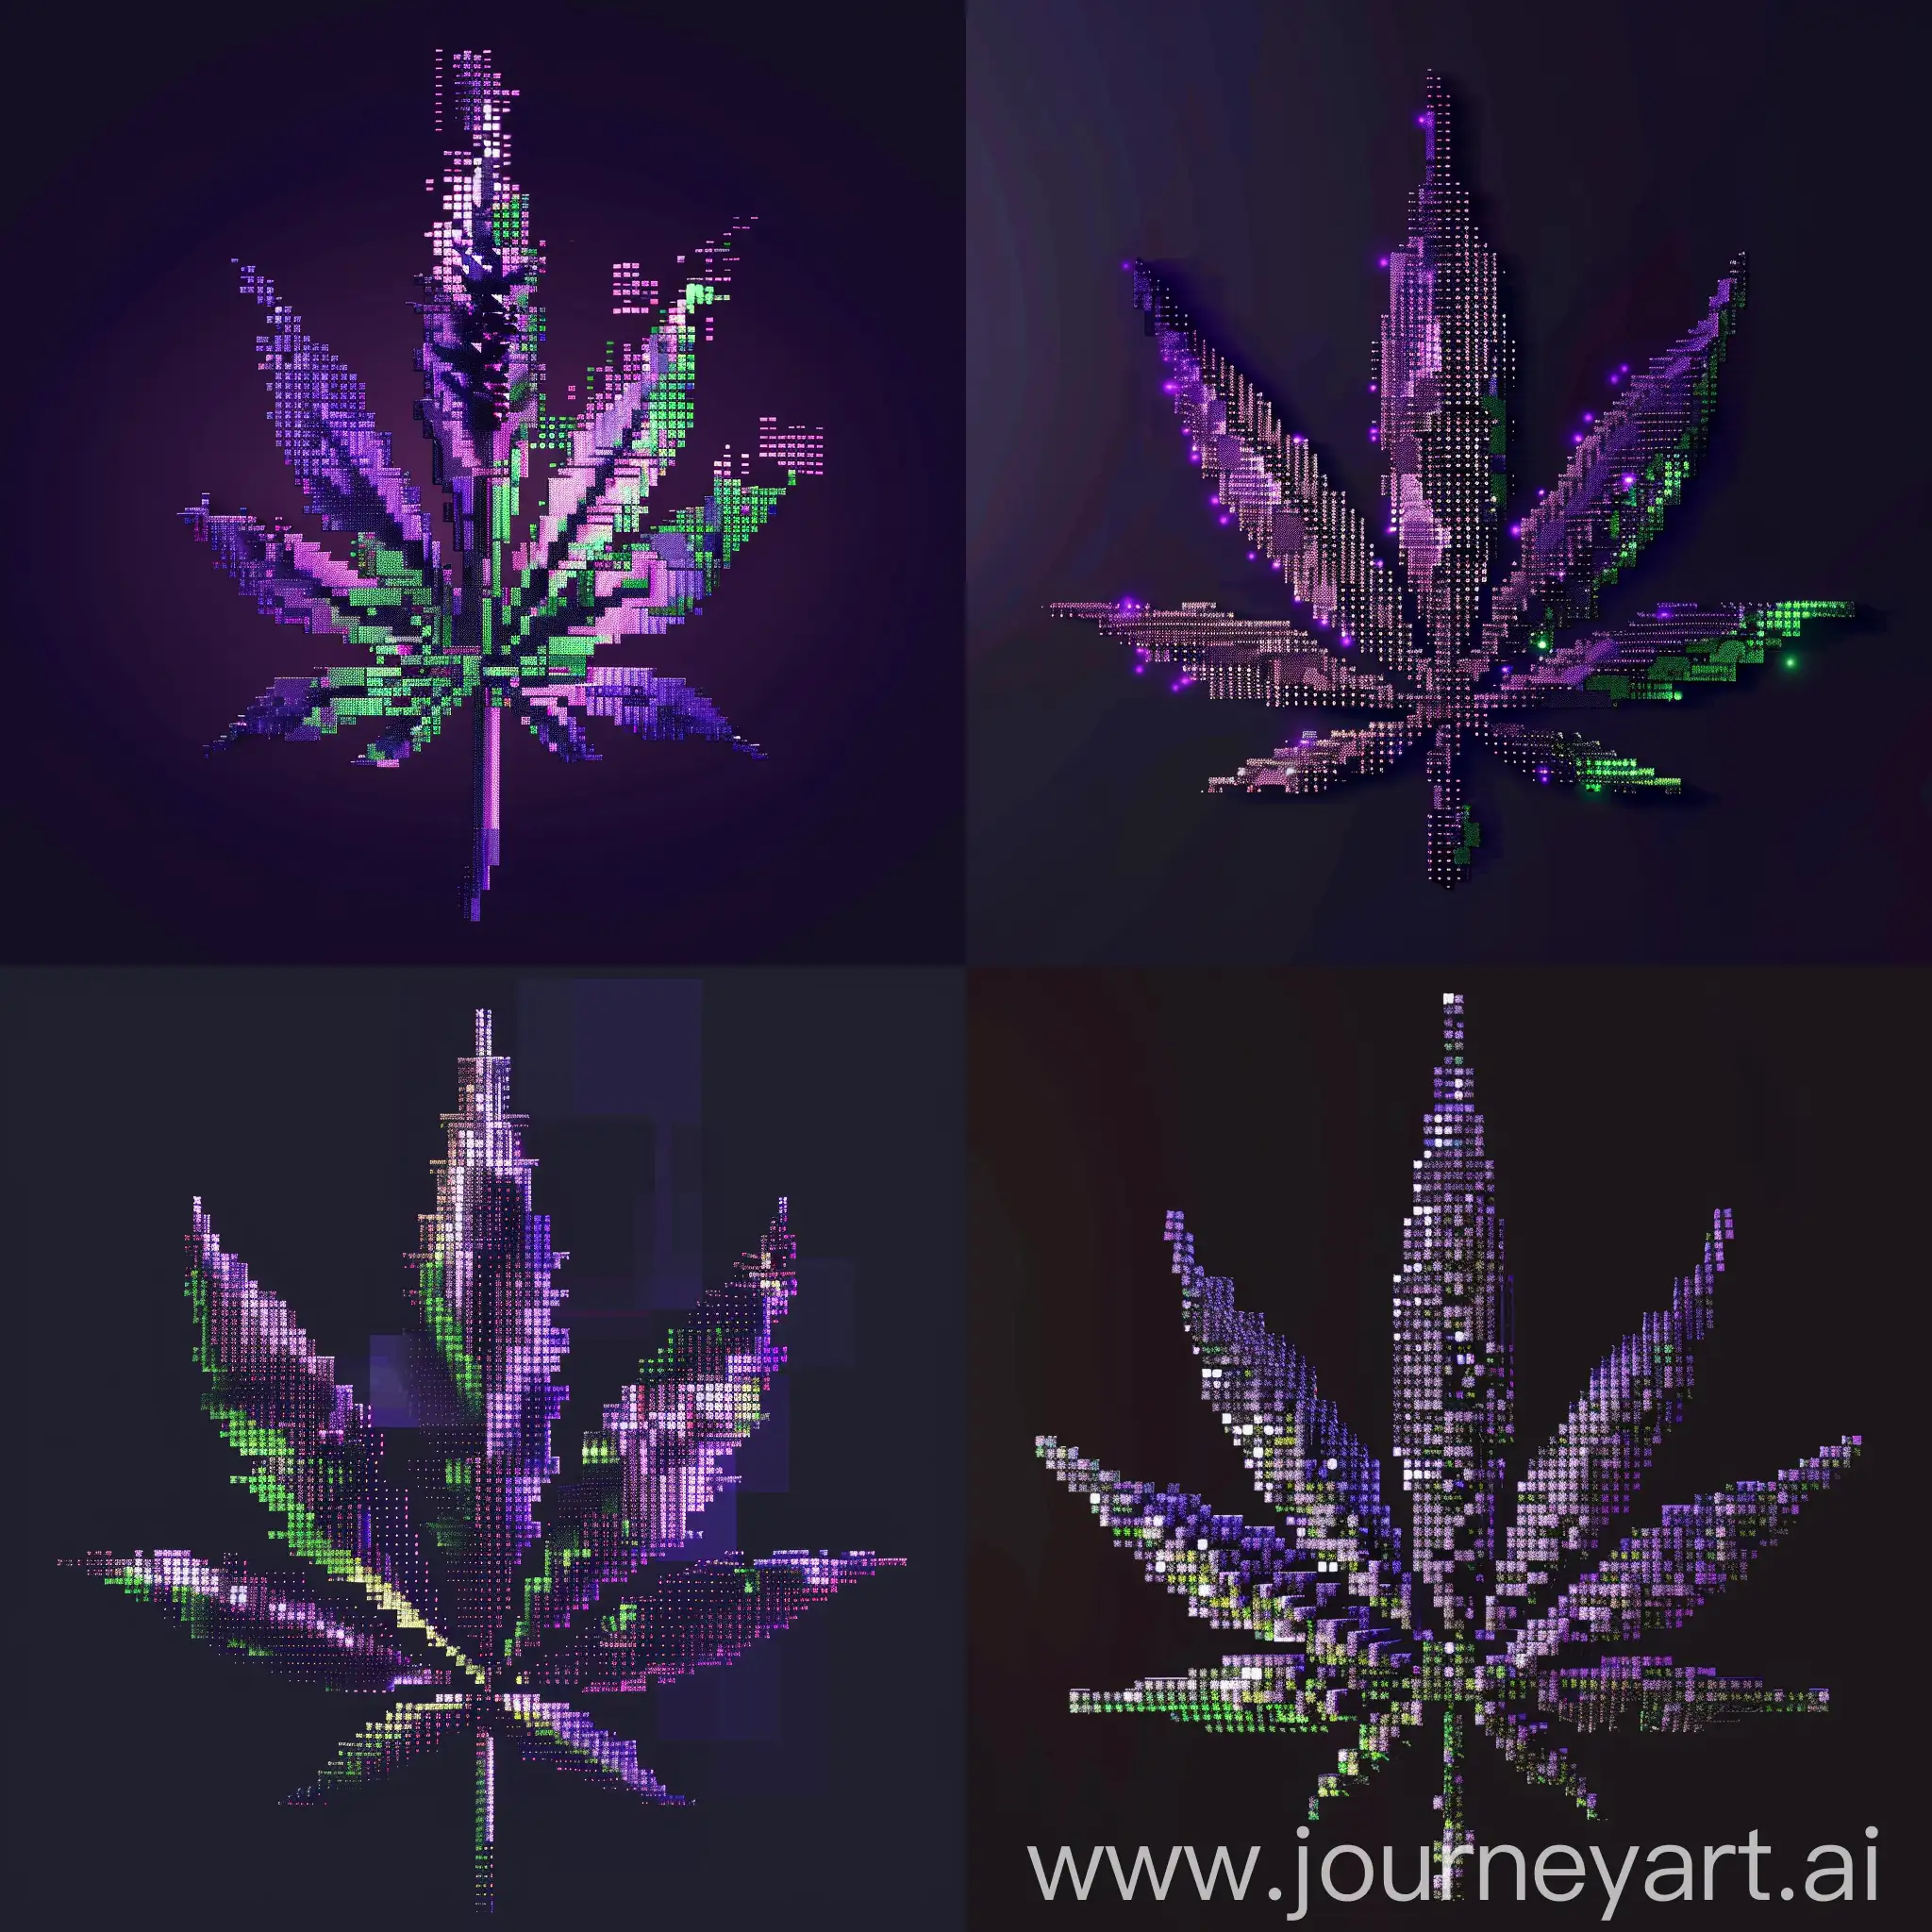 Pixelated-3D-Marijuana-Leaf-Crypto-Token-Logo-in-Purple-and-Green-Colors